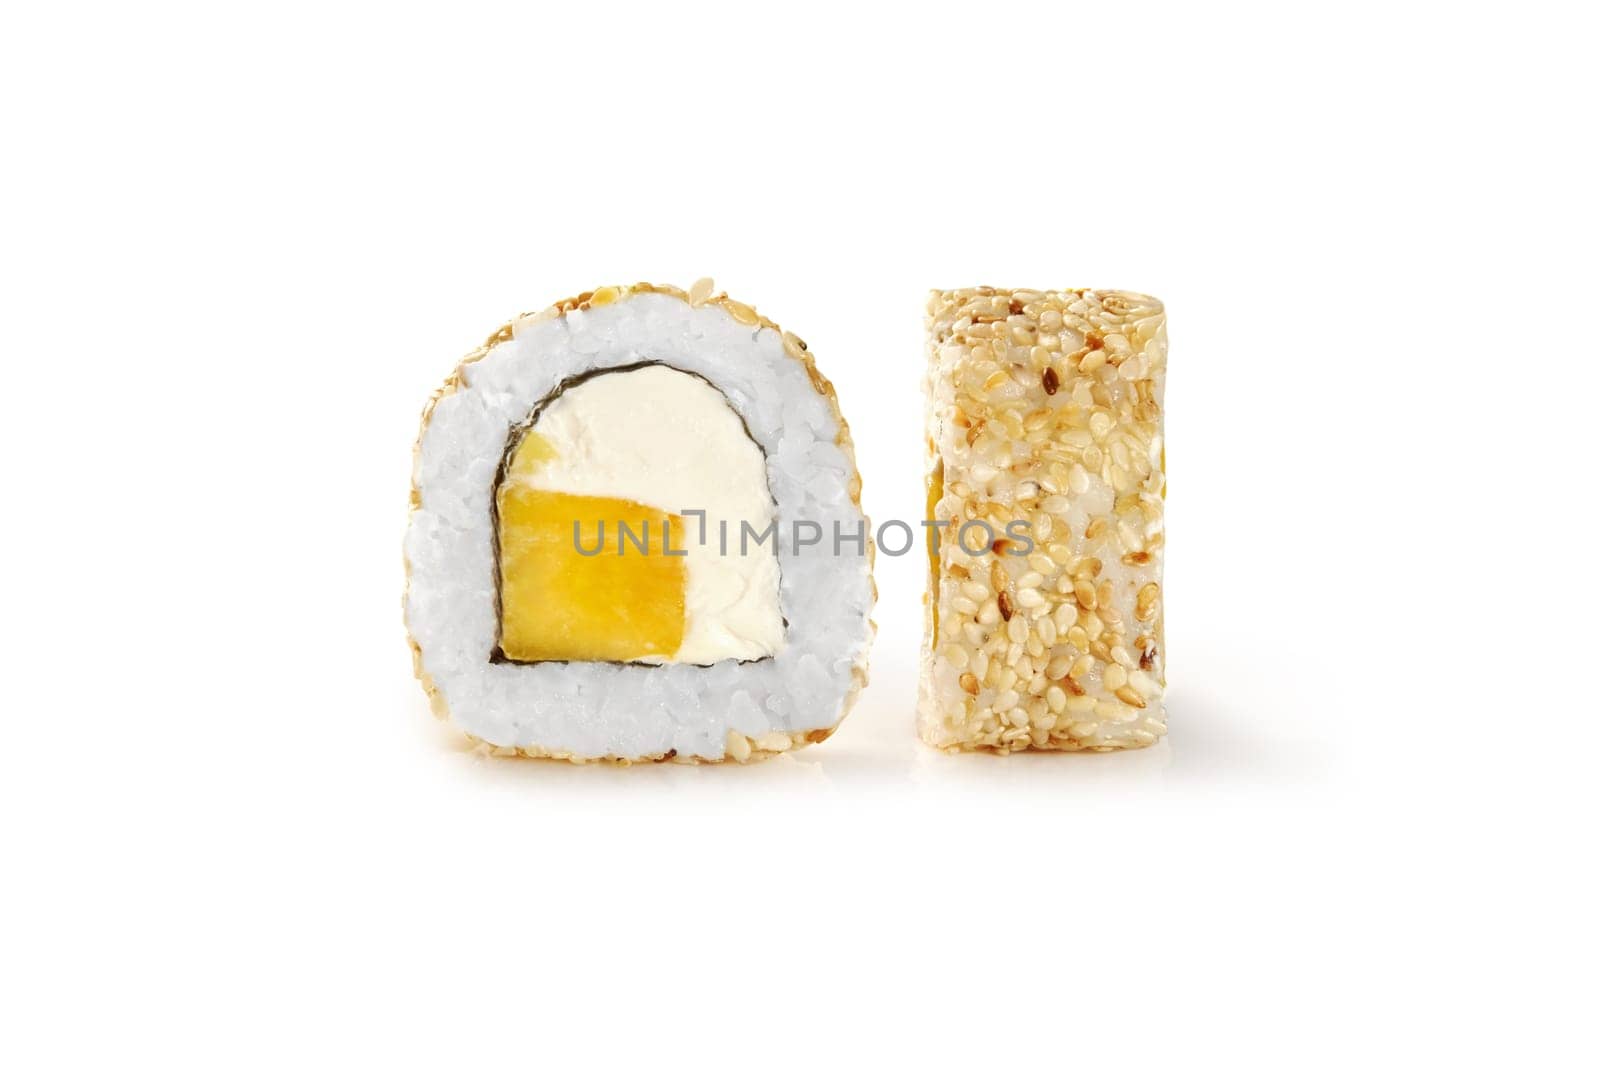 Closeup of enticing sweet and savory sushi roll in sesame seeds, with cream cheese and ripe juicy mango filling, presented on white background